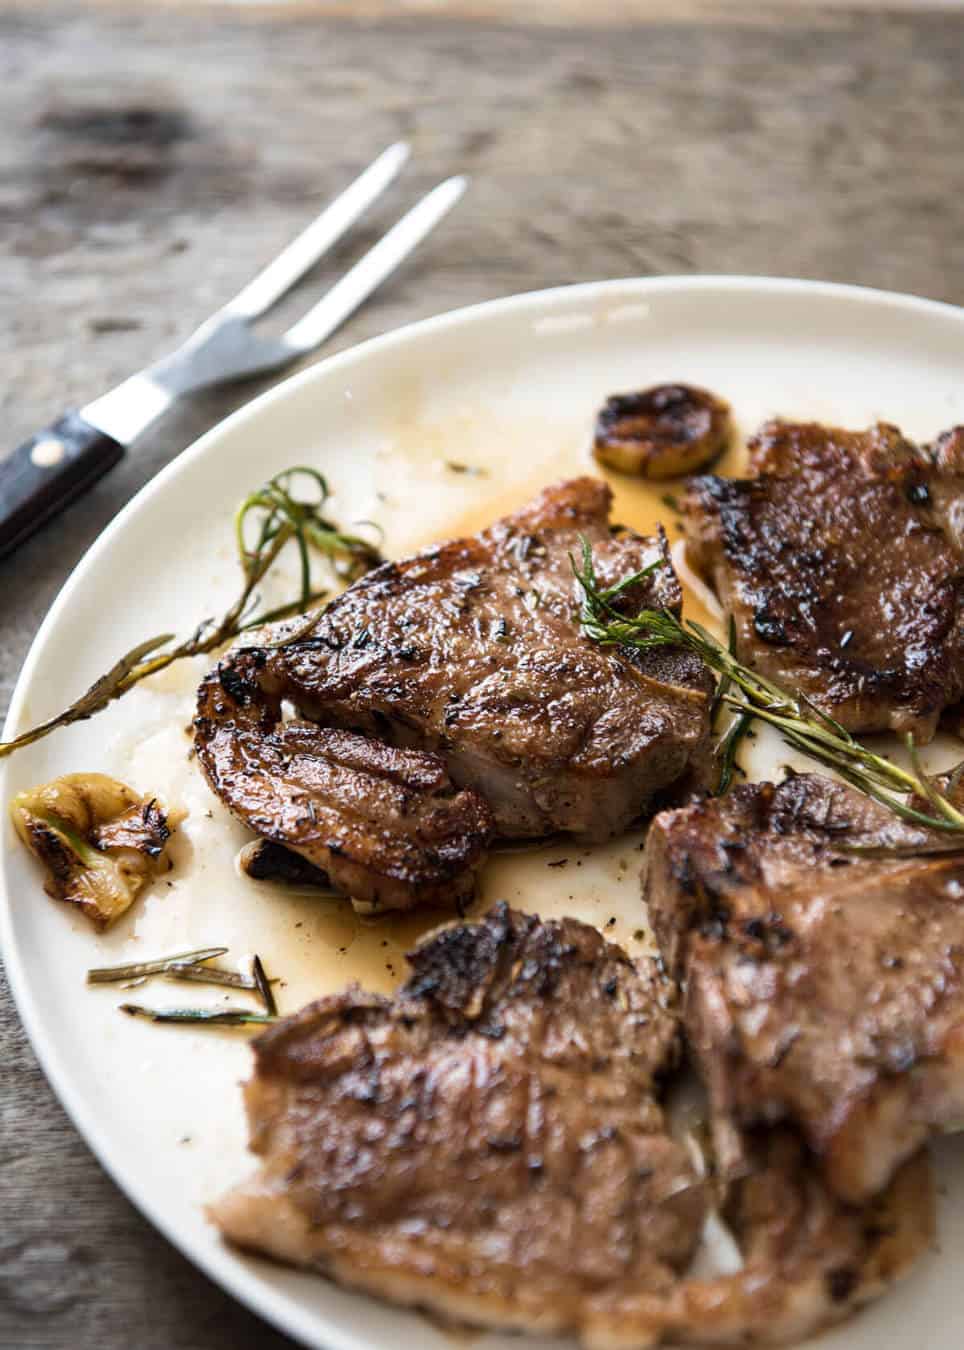 Rosemary Garlic Grilled Lamb Chops - A simple marinade infuses this with fantastic flavour! Use the marinade for any quick-cooking cut of lamb - chops or steaks. recipetineats.com